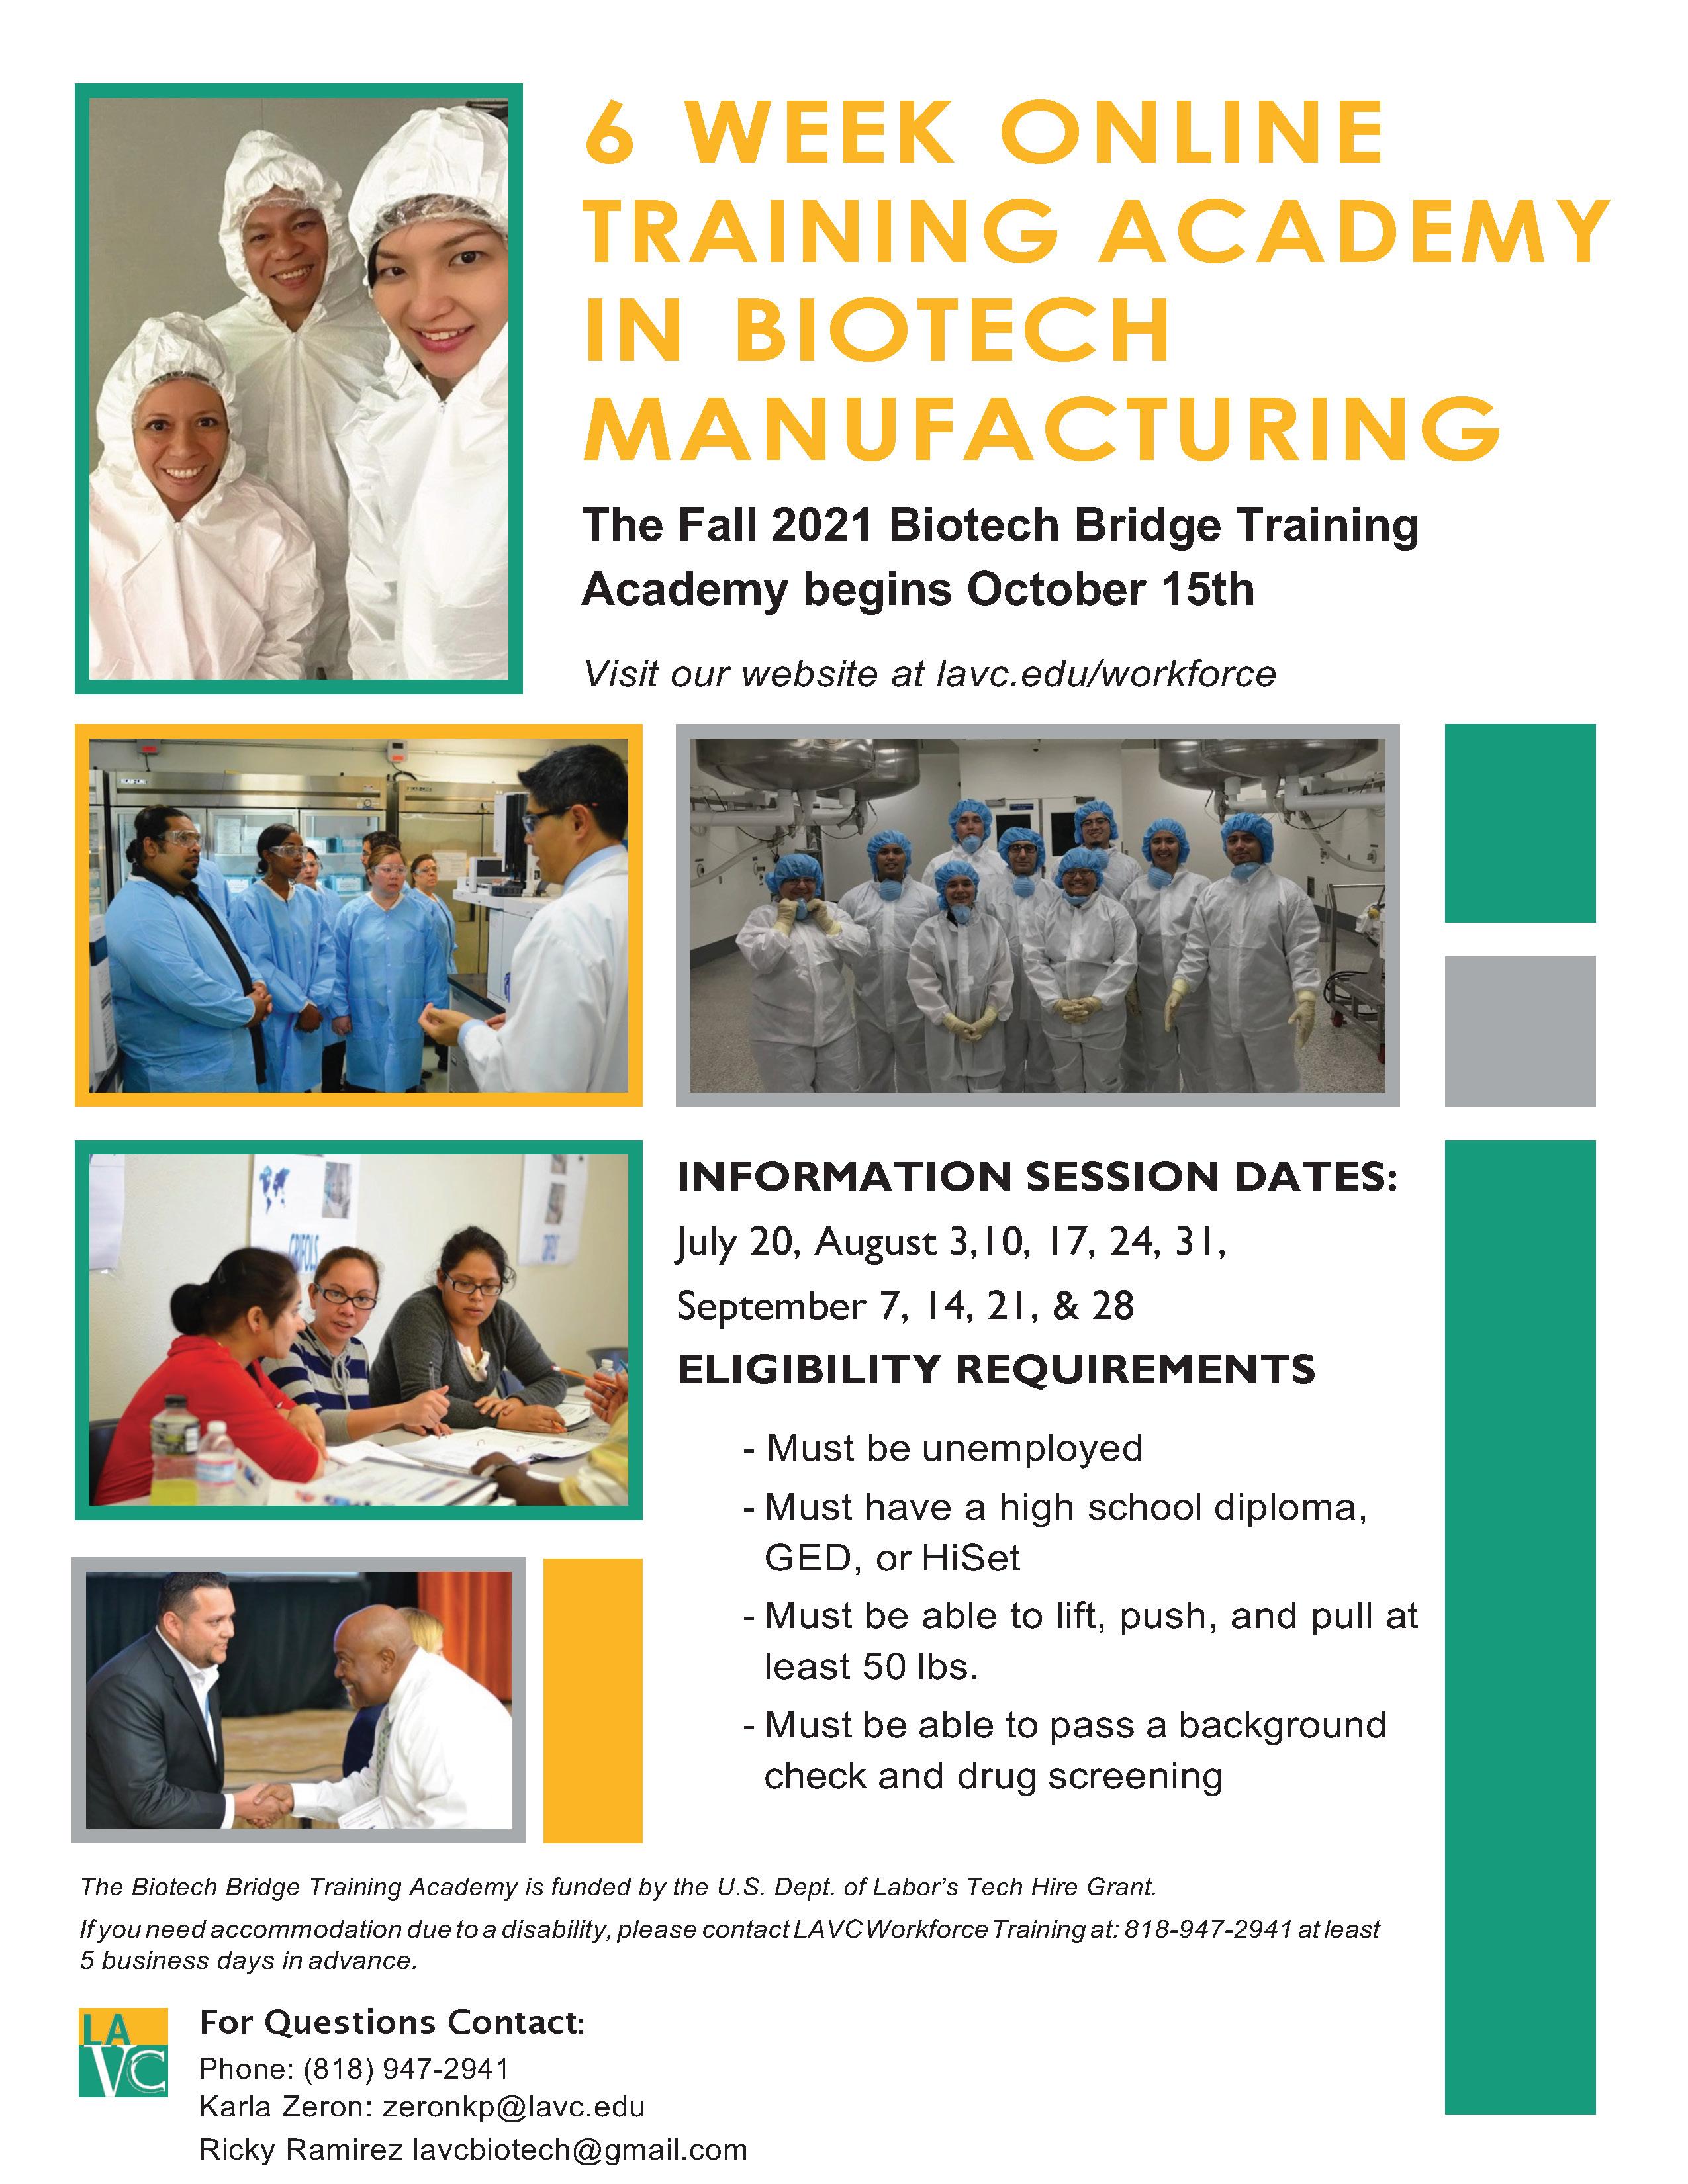 6 WEEK ONLINE TRAINING ACADEMY IN BIOTECH MANUFACTURING The Fall 2021 Biotech Bridge Training Academy begins October 15th Visit our website at lavc.edu/workforce INFORMATION SESSION DATES: July 20, August 3,10, 17, 24, 31, September 7, 14, 21, & 28 ELIGIBILITY REQUIREMENTS - Must be unemployed - Must have a high school diploma, GED, or HiSet - Must be able to lift, push, and pull at least 50 lbs. - Must be able to pass a background check and drug screening The Biotech Bridge Training Academy is funded by the U.S. Dept. of Labor’s Tech Hire Grant. If you need accommodation due to a disability, please contact LAVC Workforce Training at: 818-947-2941 at least 5 business days in advance. For Questions Contact: Phone: (818) 947-2941 Karla Zeron: zeronkp@lavc.edu Ricky Ramirez lavcbiotech@gmail.com